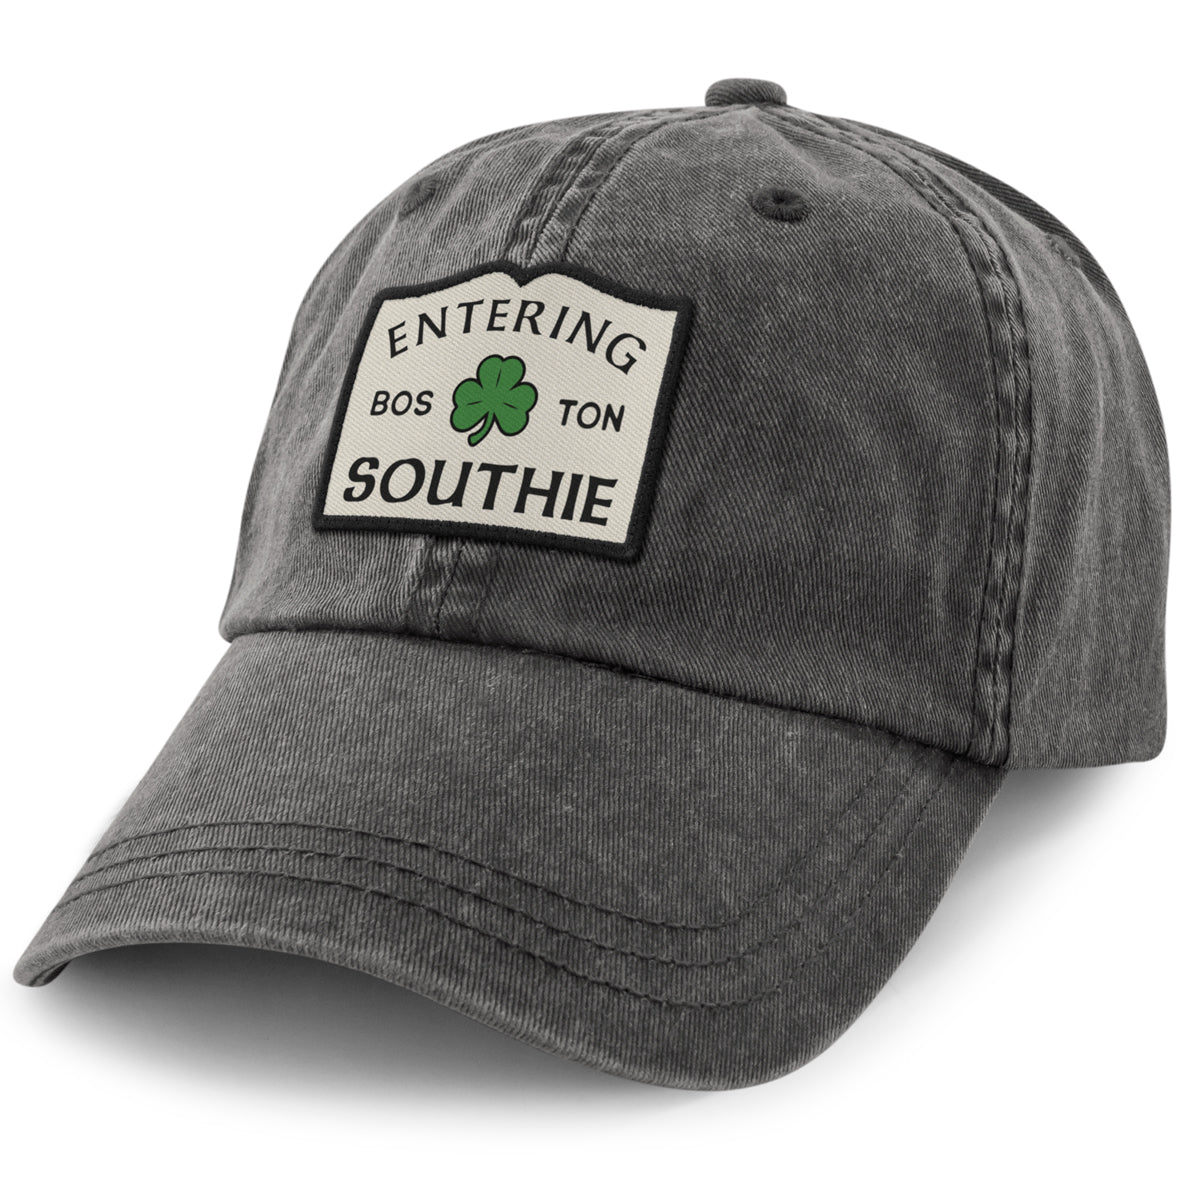 Entering Southie Washed Dad Hat - Chowdaheadz